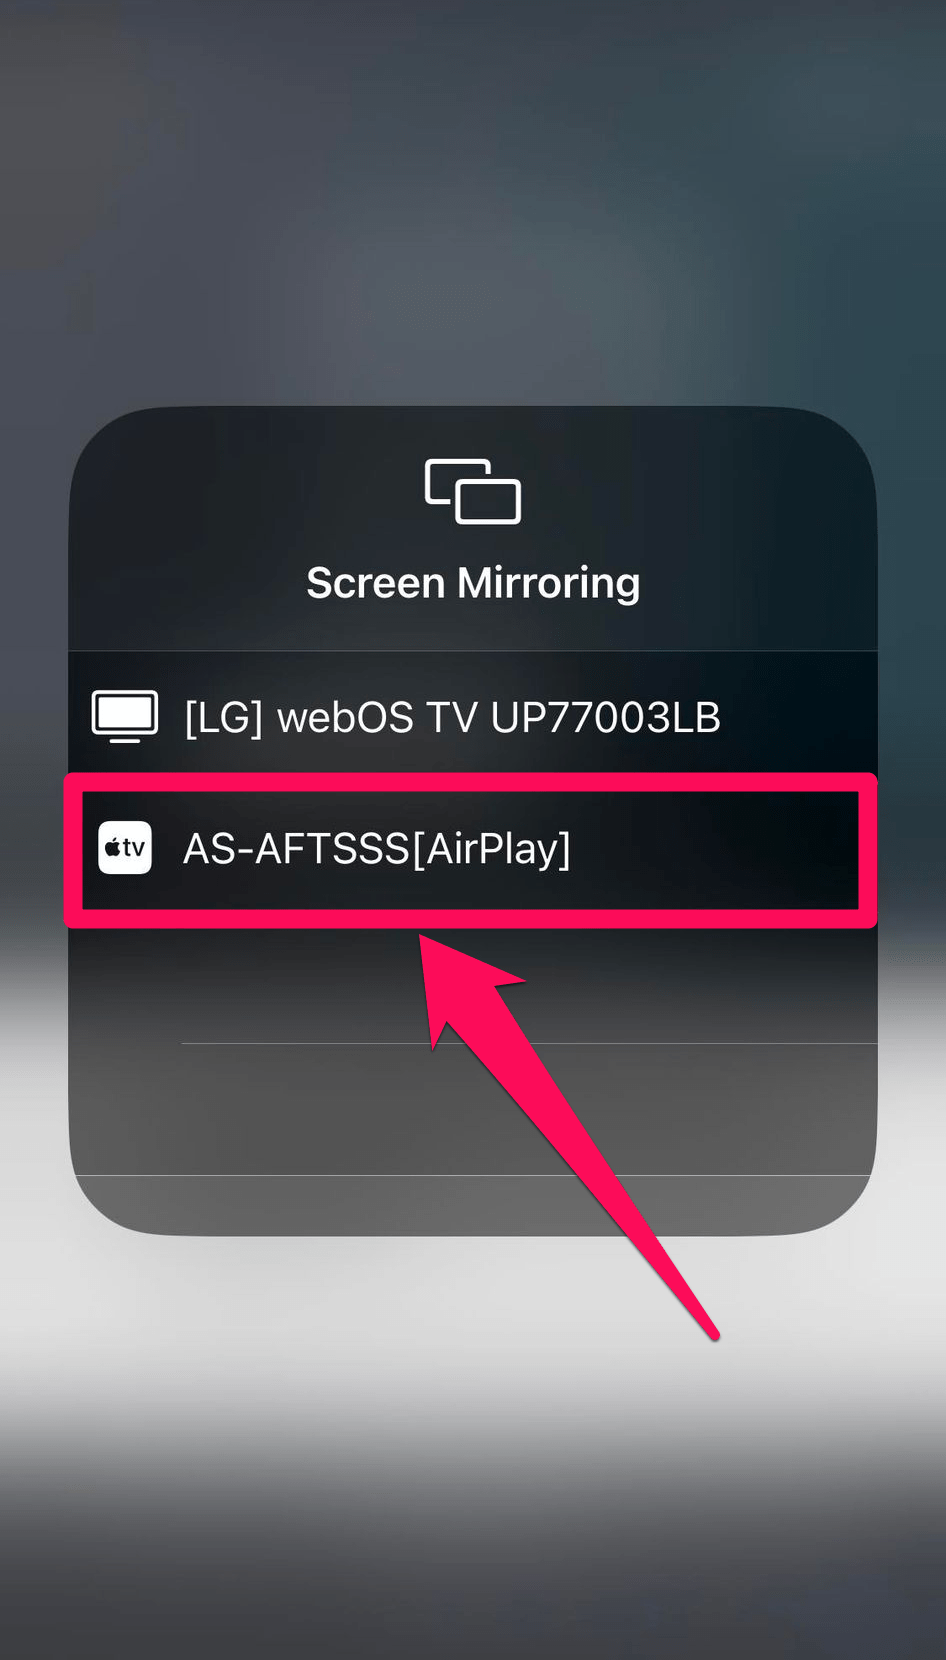 Select the AirPlay device from the list